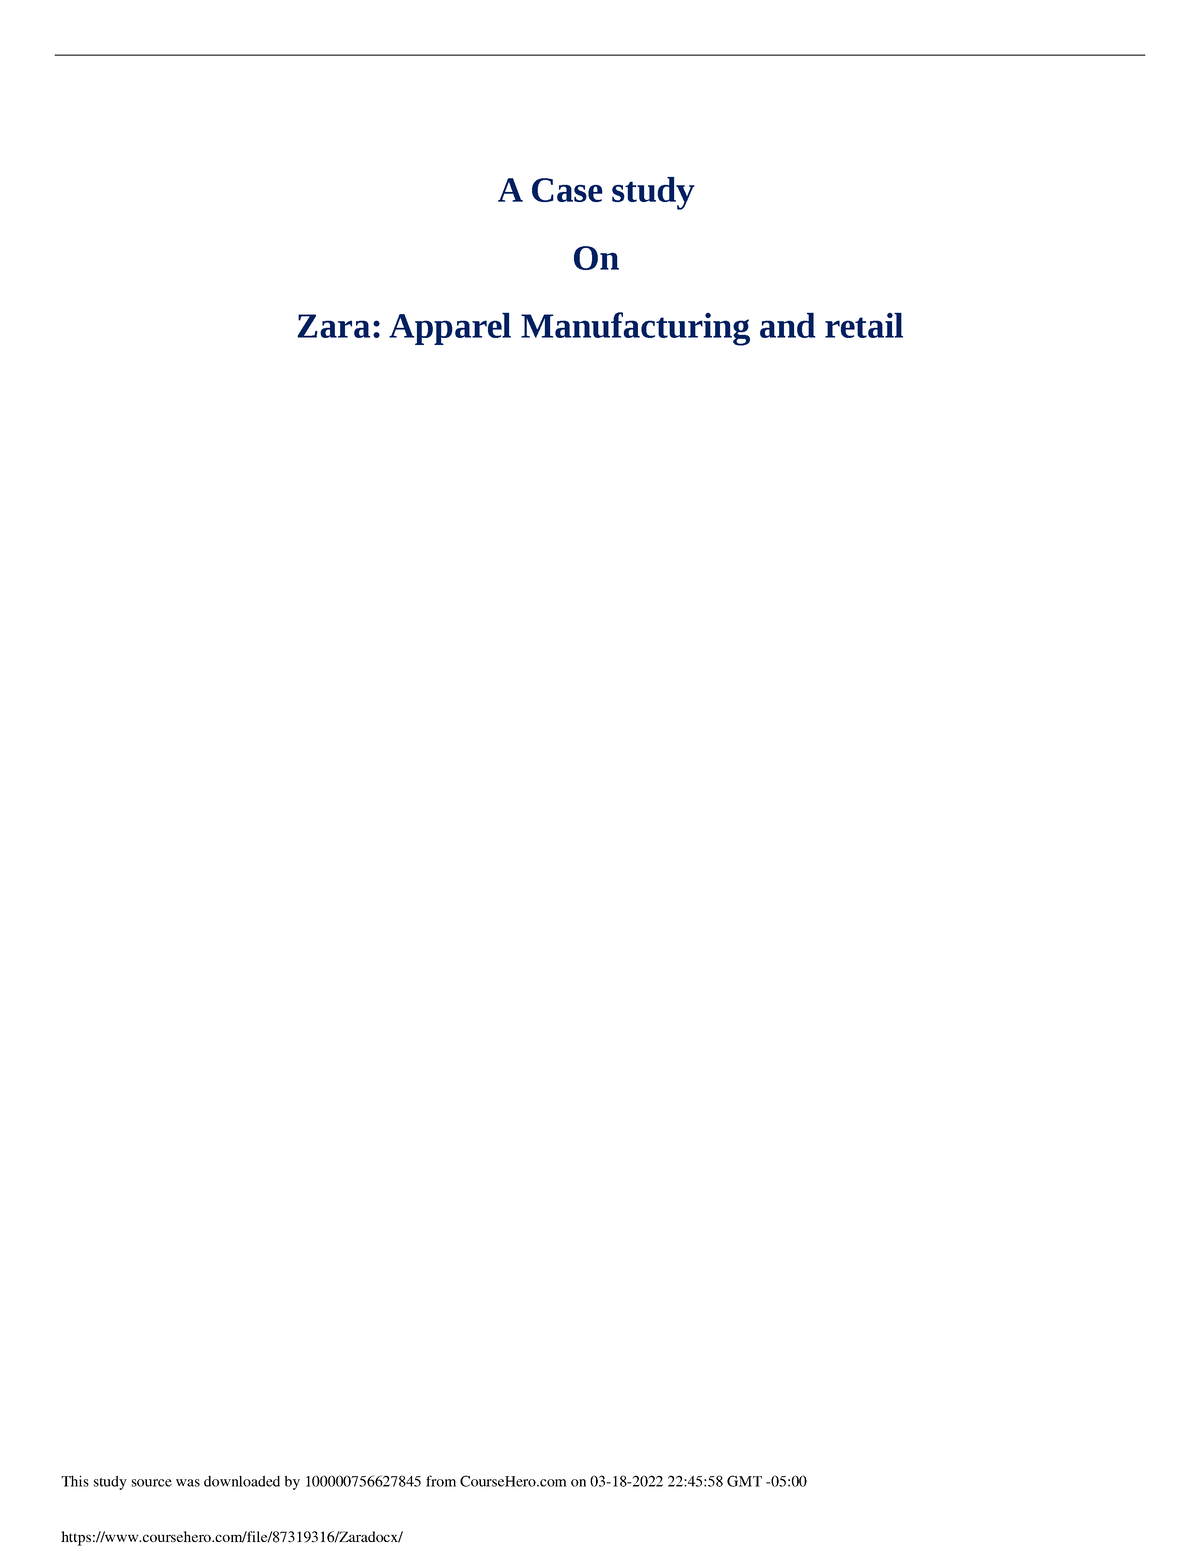 zara apparel manufacturing and retail case study answers